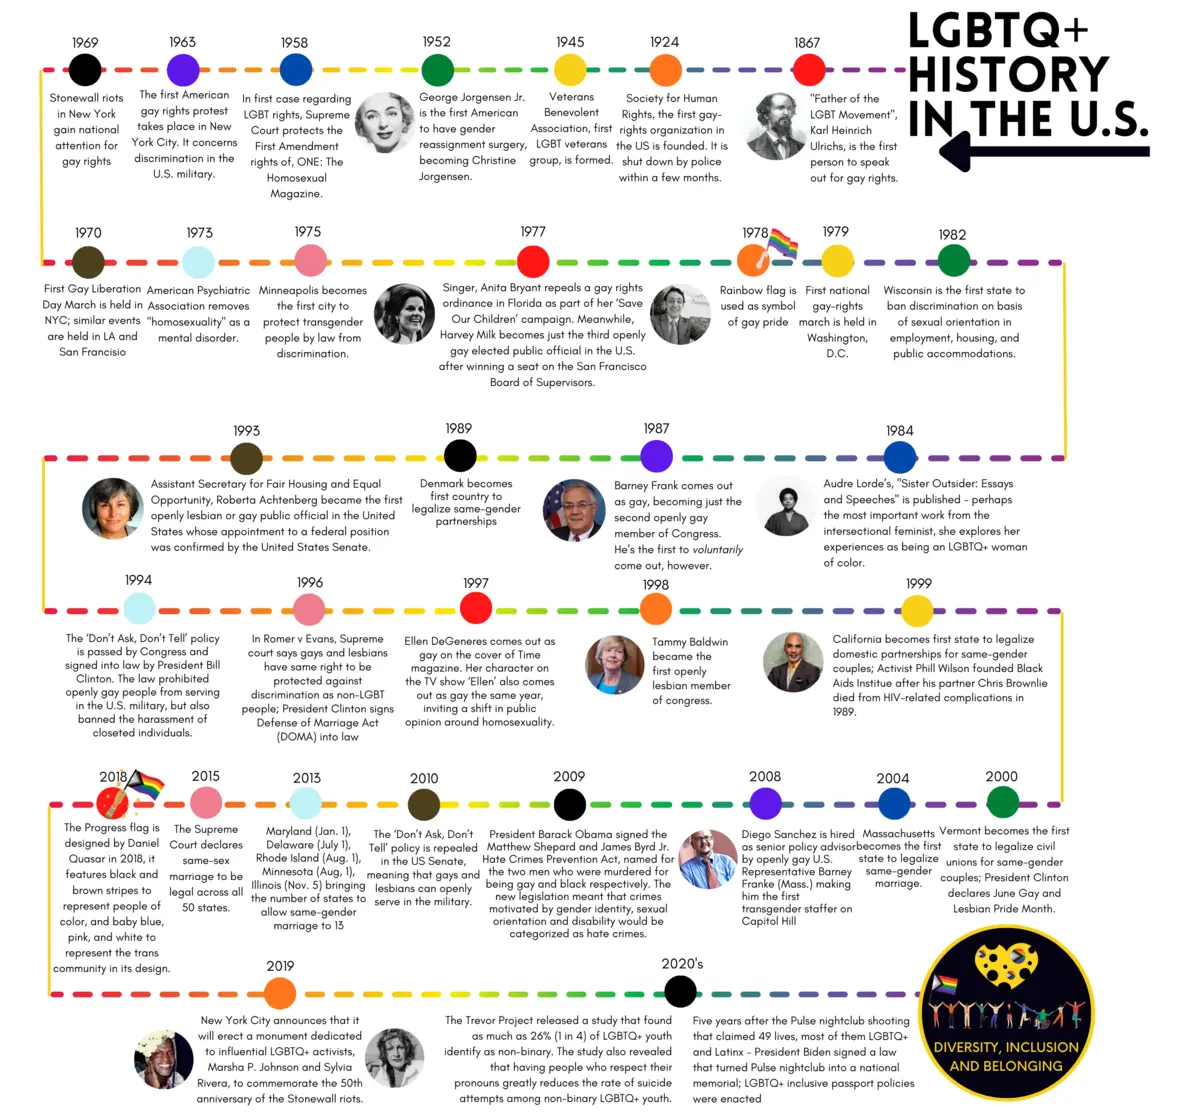 Infographic showing lgbtq+ history from Stonewall to the present.